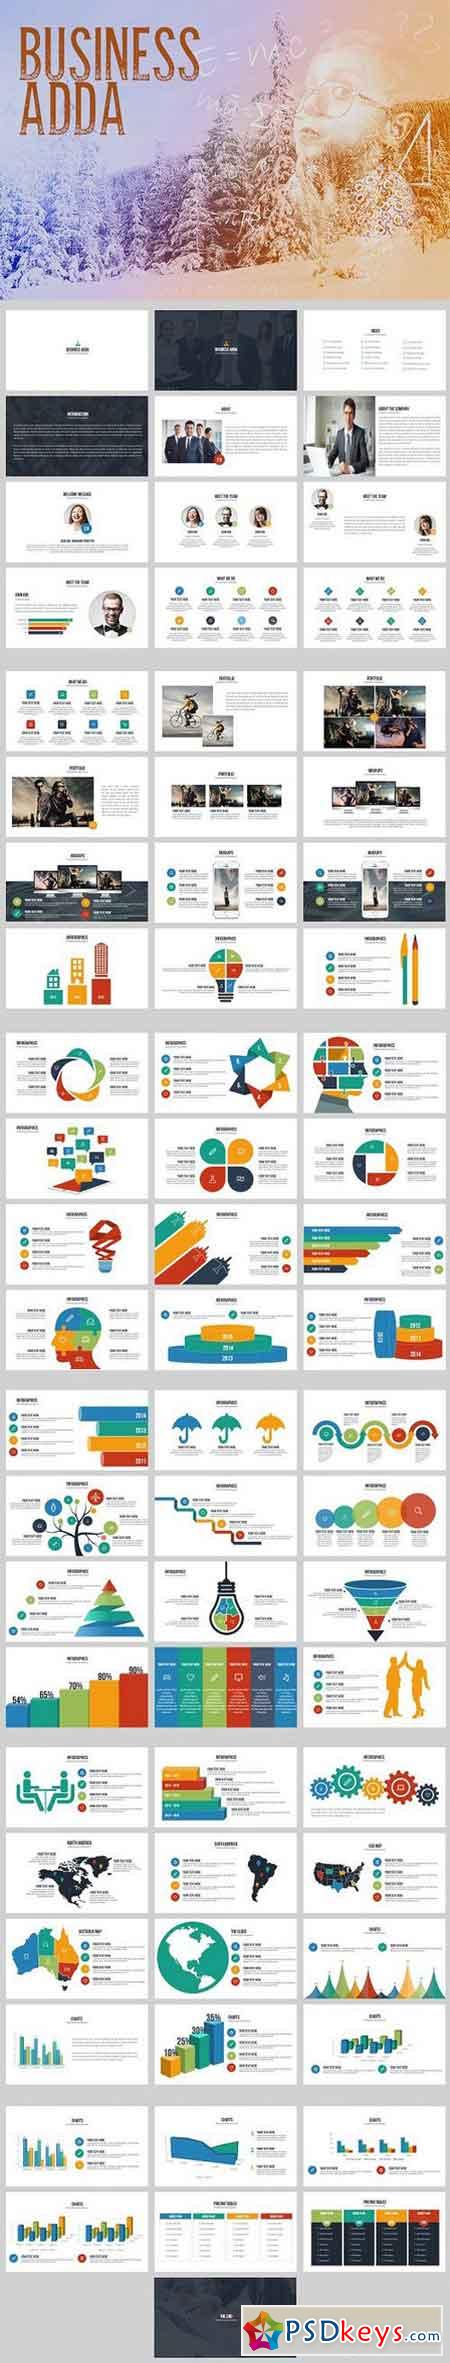 Business Adda Powerpoint Template 1360013